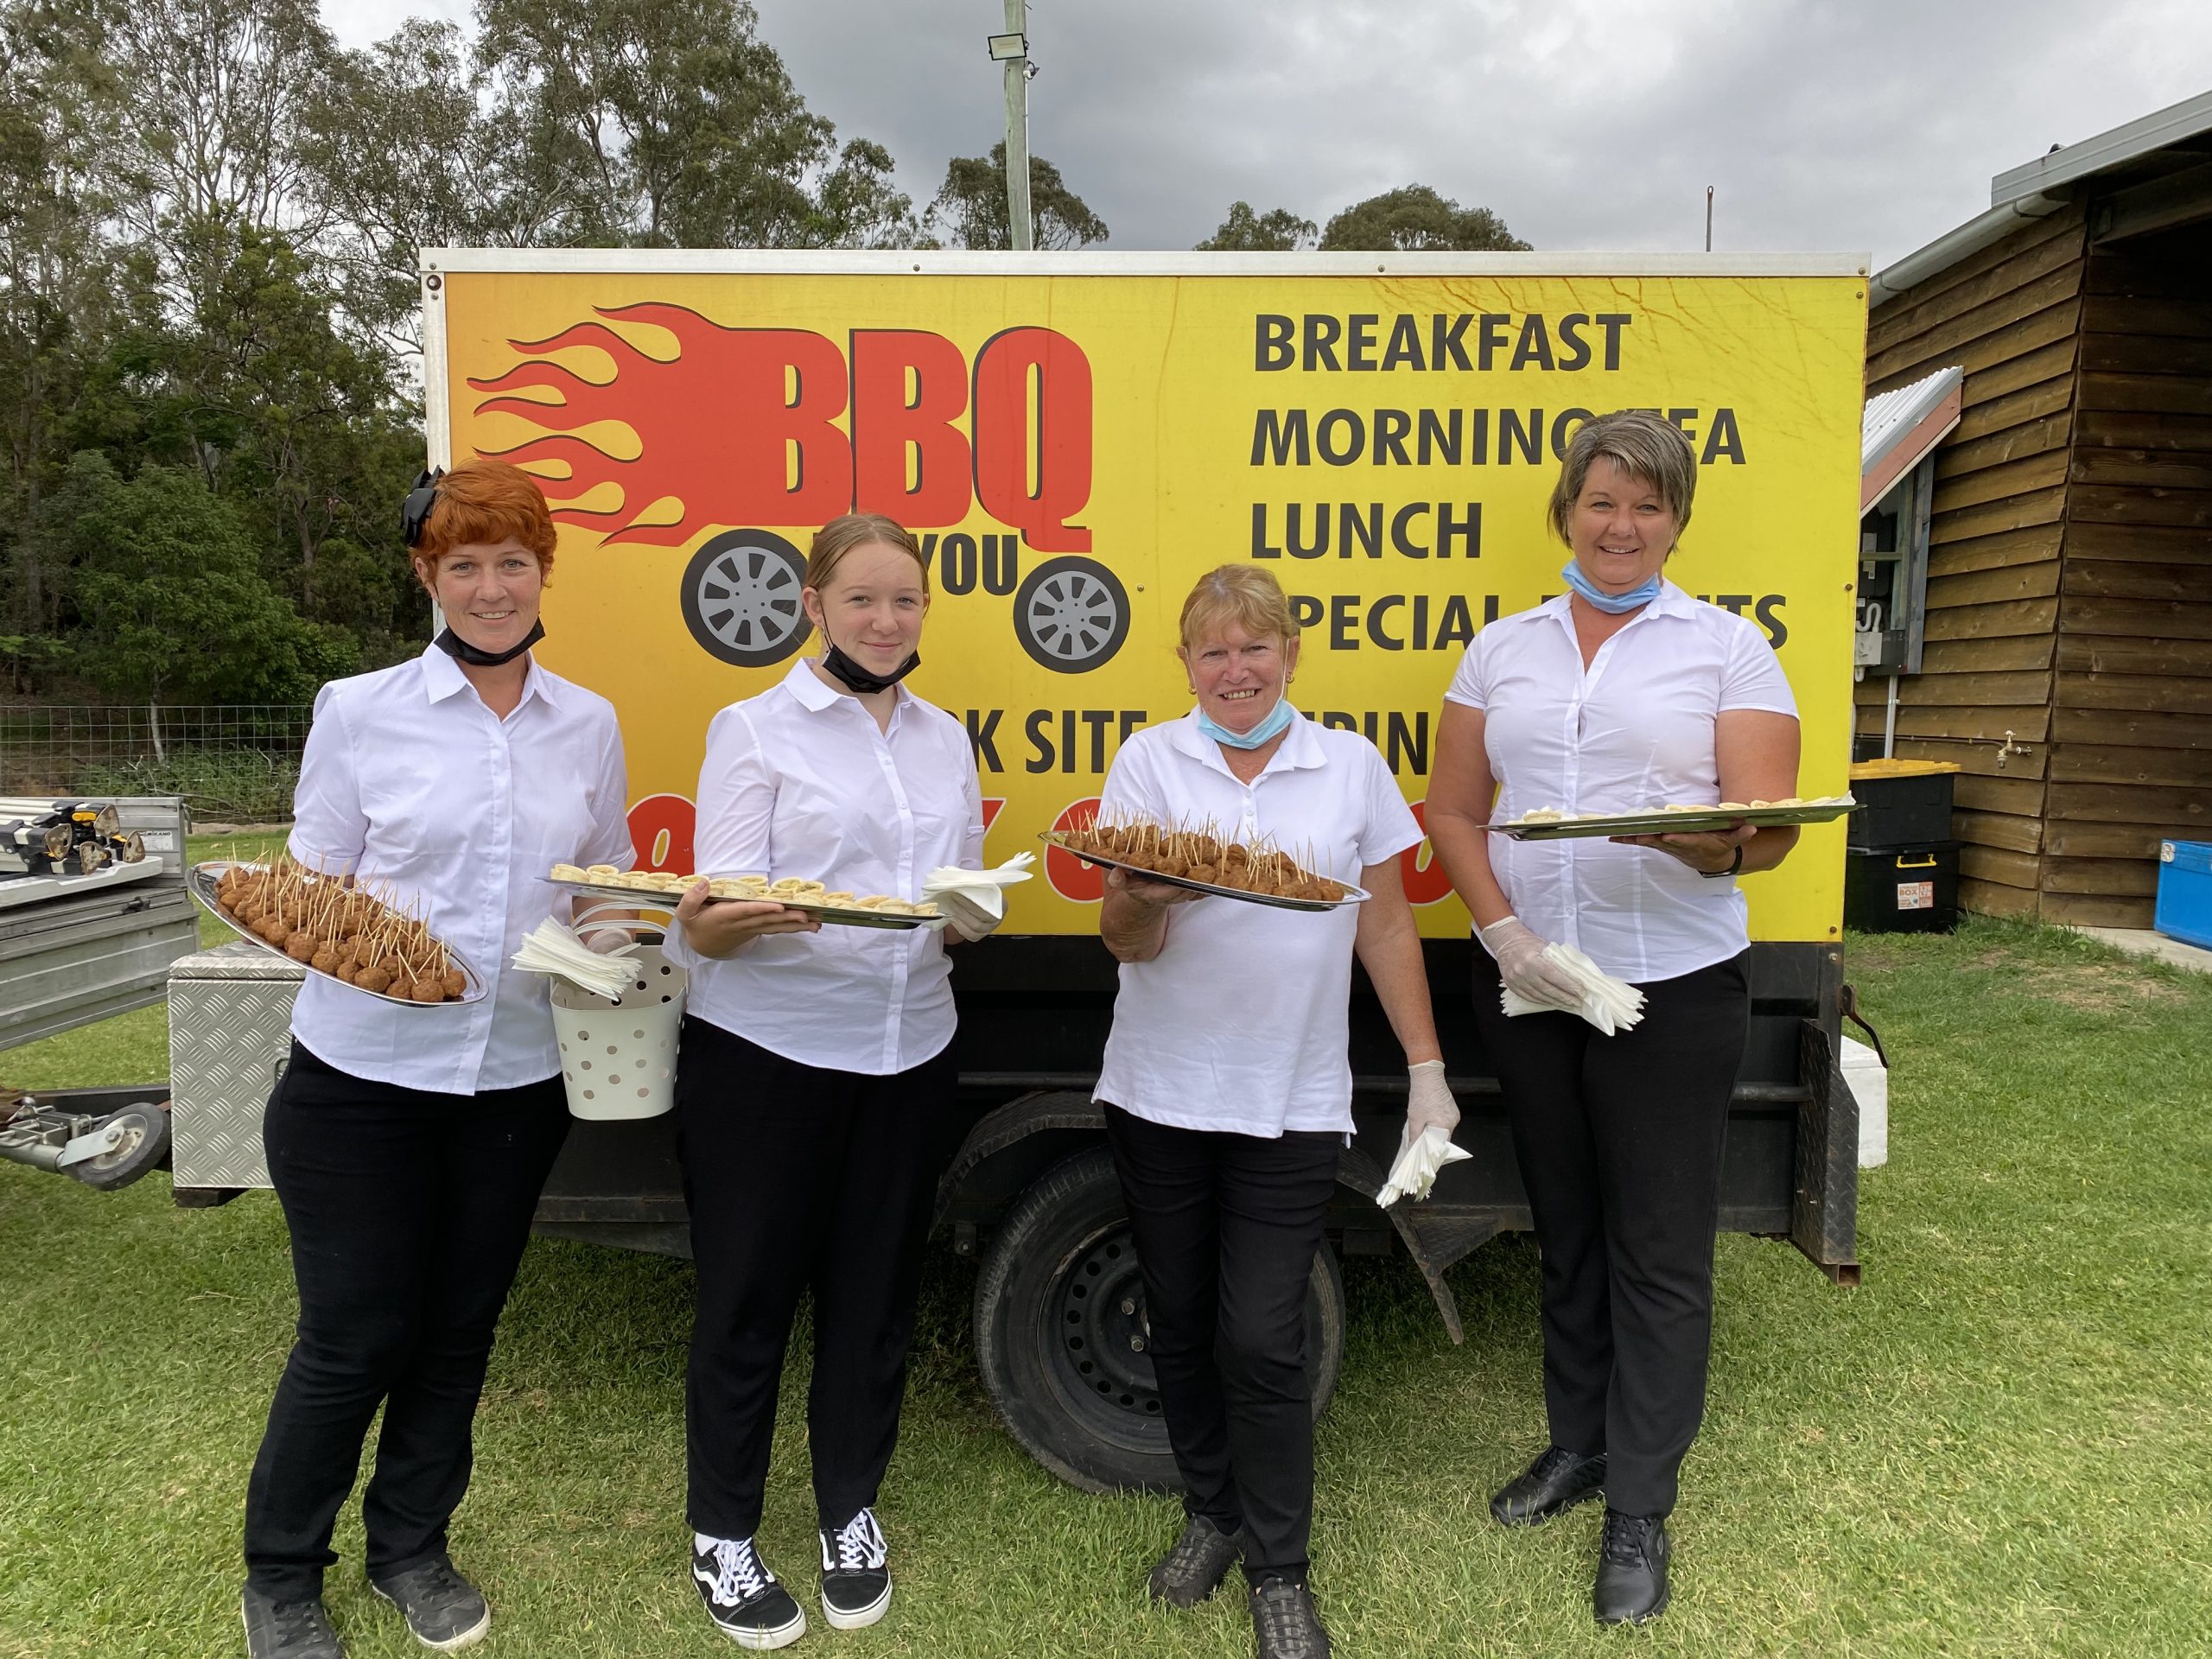 The team members of Logan business, BBQ to You.